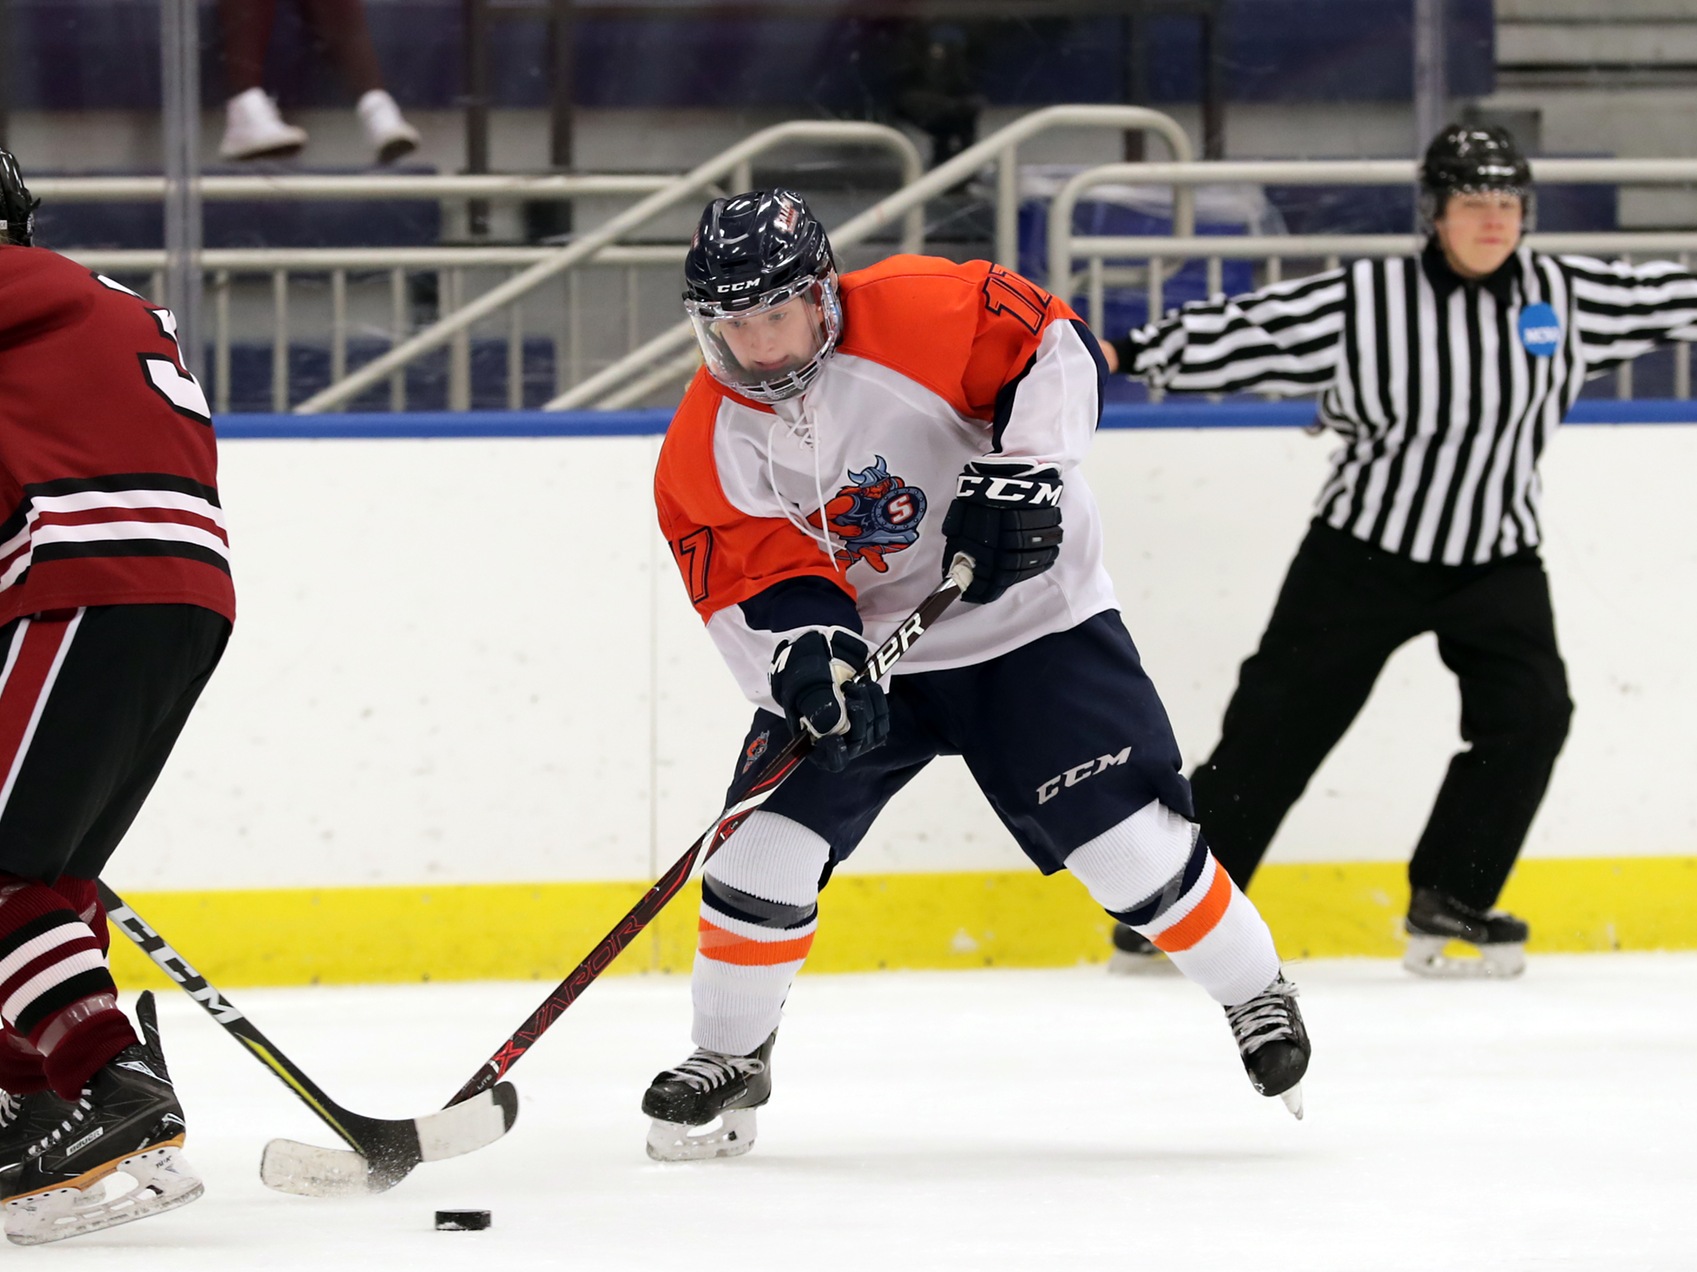 Salem State Scores 5-0 Victory Over Anna Maria